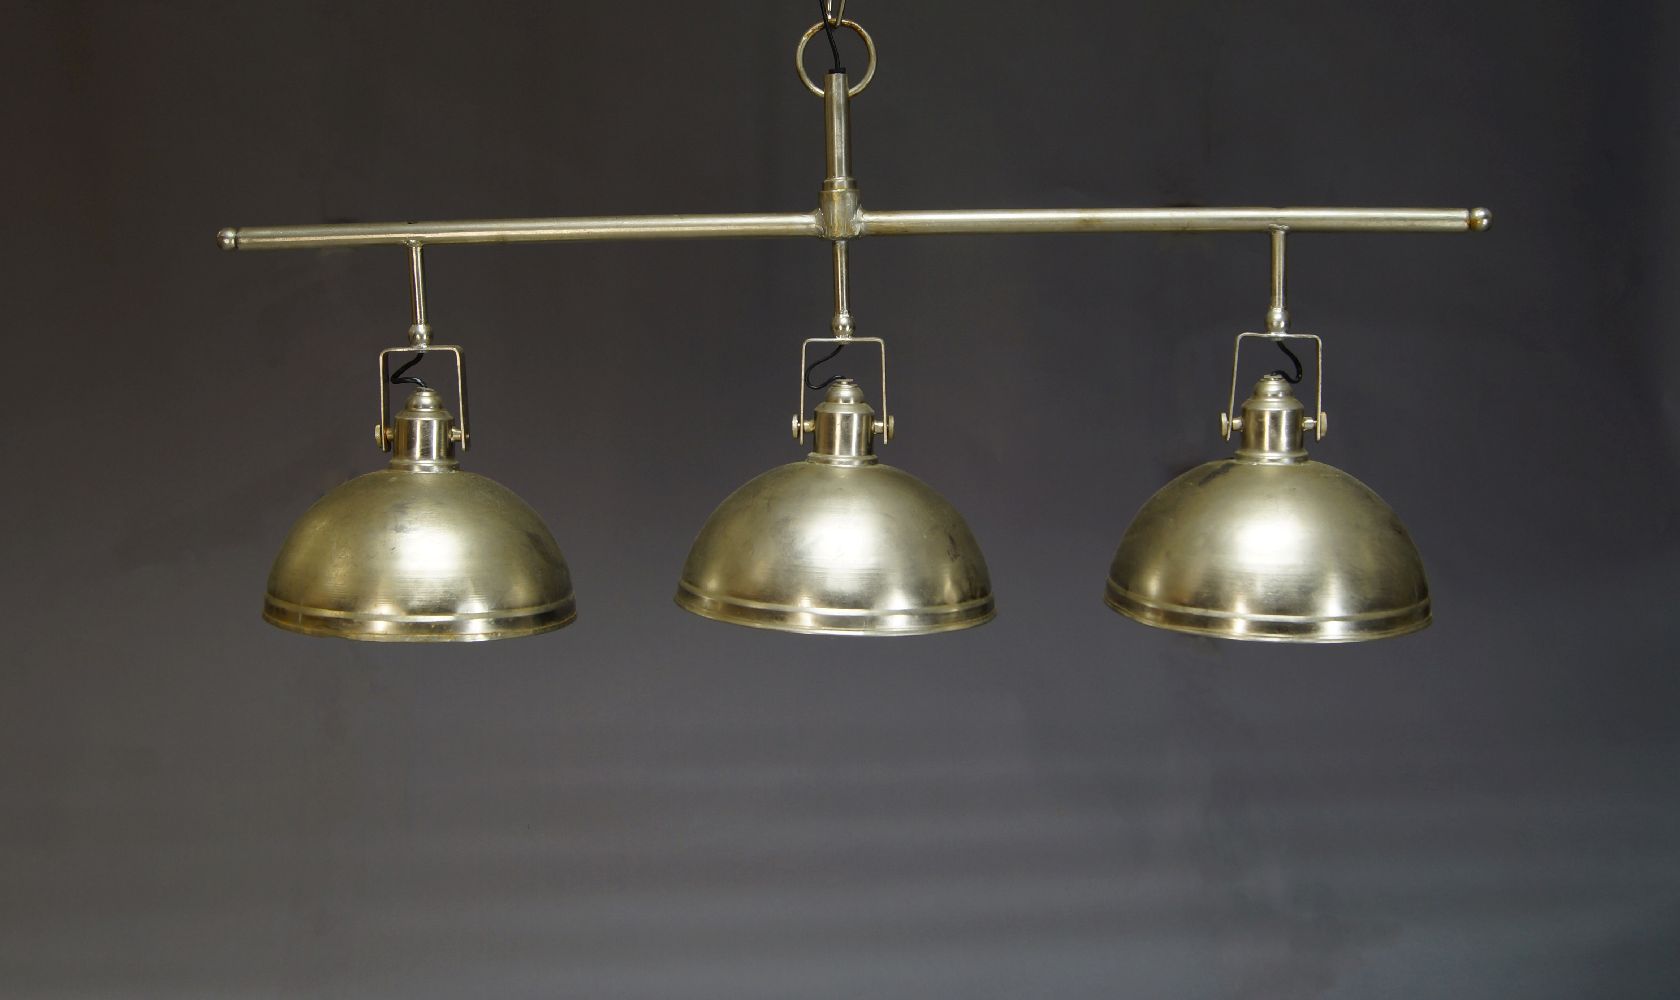 A industrial style three light pendant light, late 20th Century, with three shades suspended from